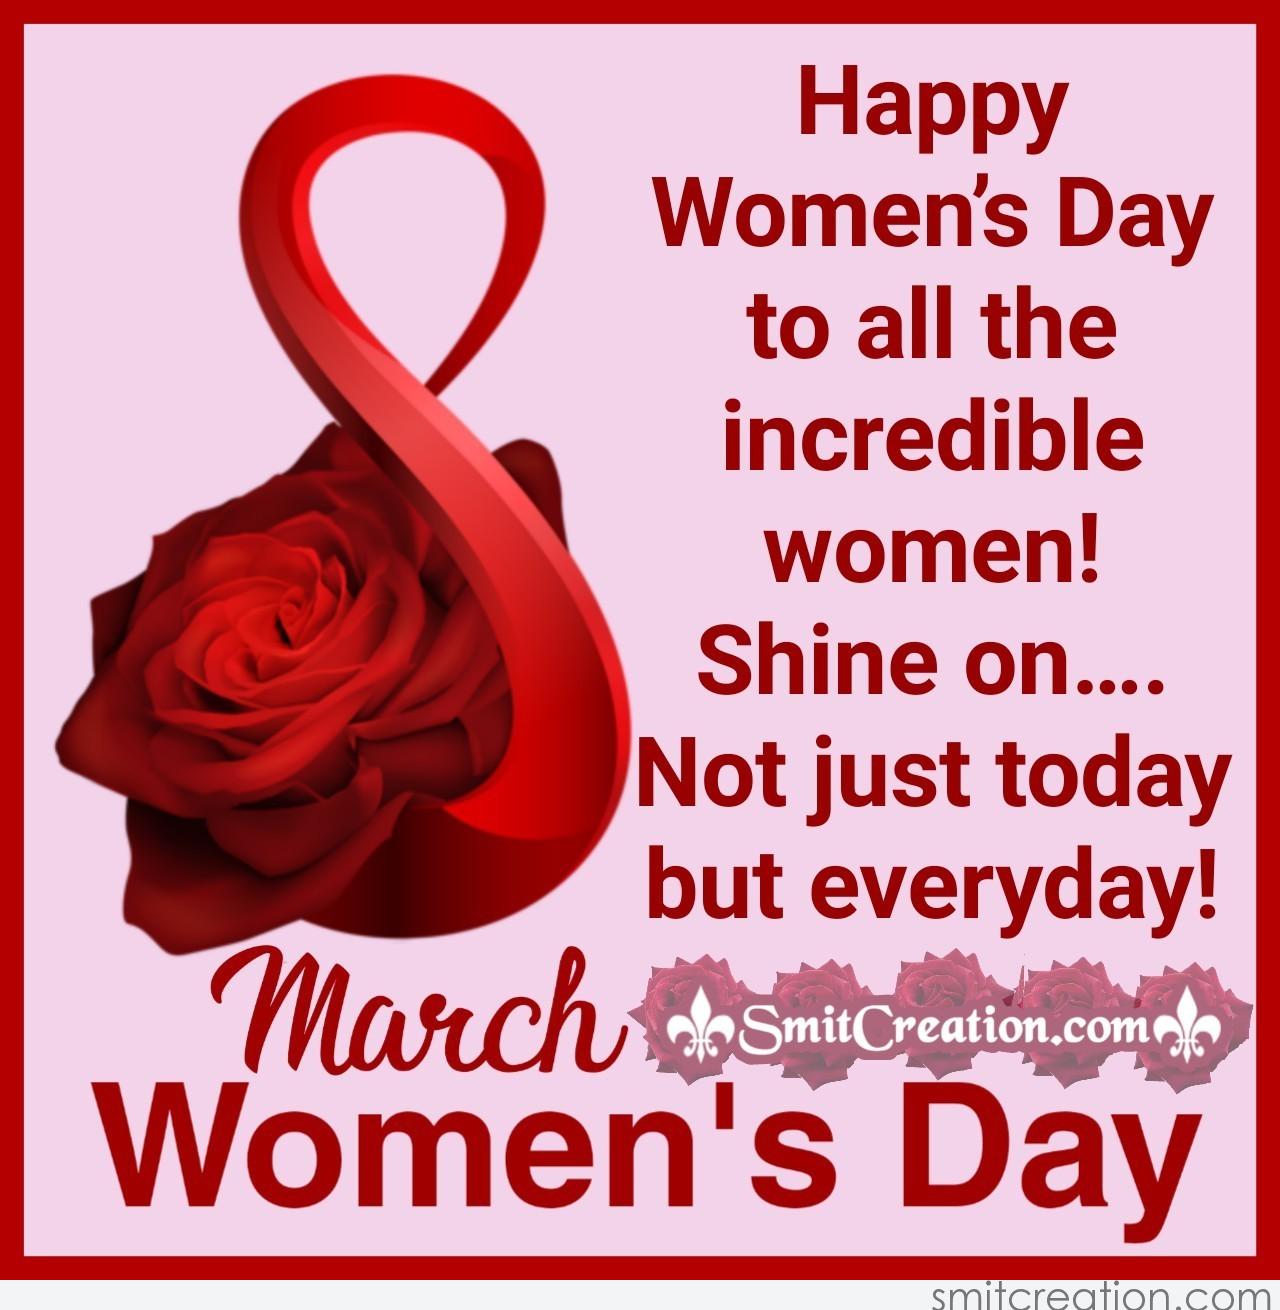 Women's Day Wishes, Messages, Quotes Images 